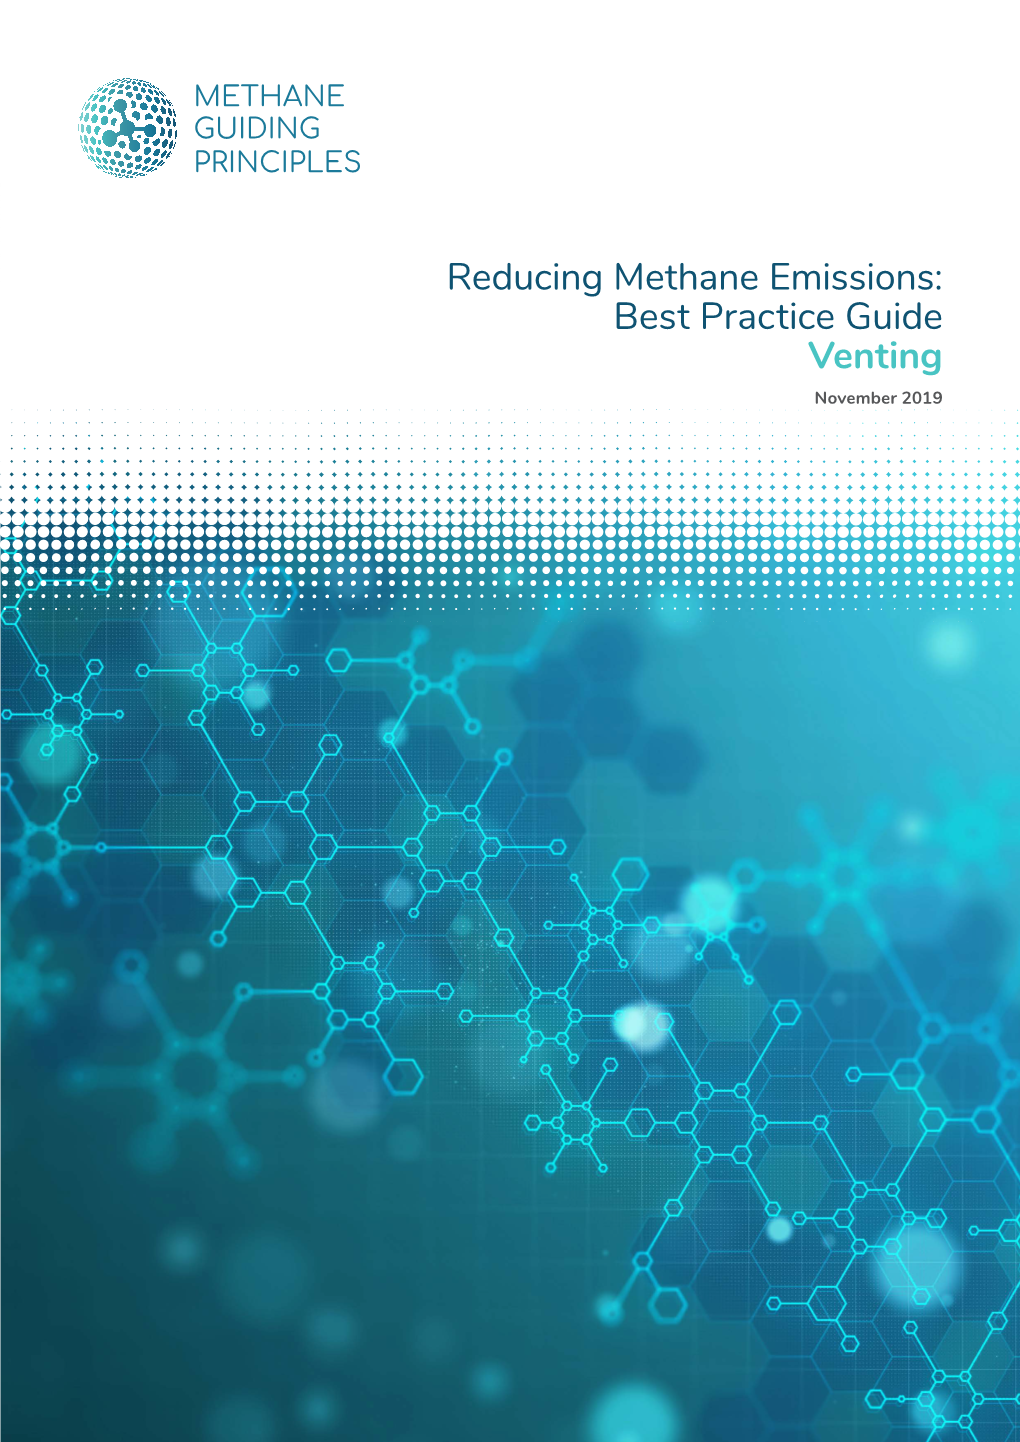 Reducing Methane Emissions: Best Practice Guide Venting November 2019 Disclaimer This Document Has Been Developed by the Methane Guiding Principles Partnership